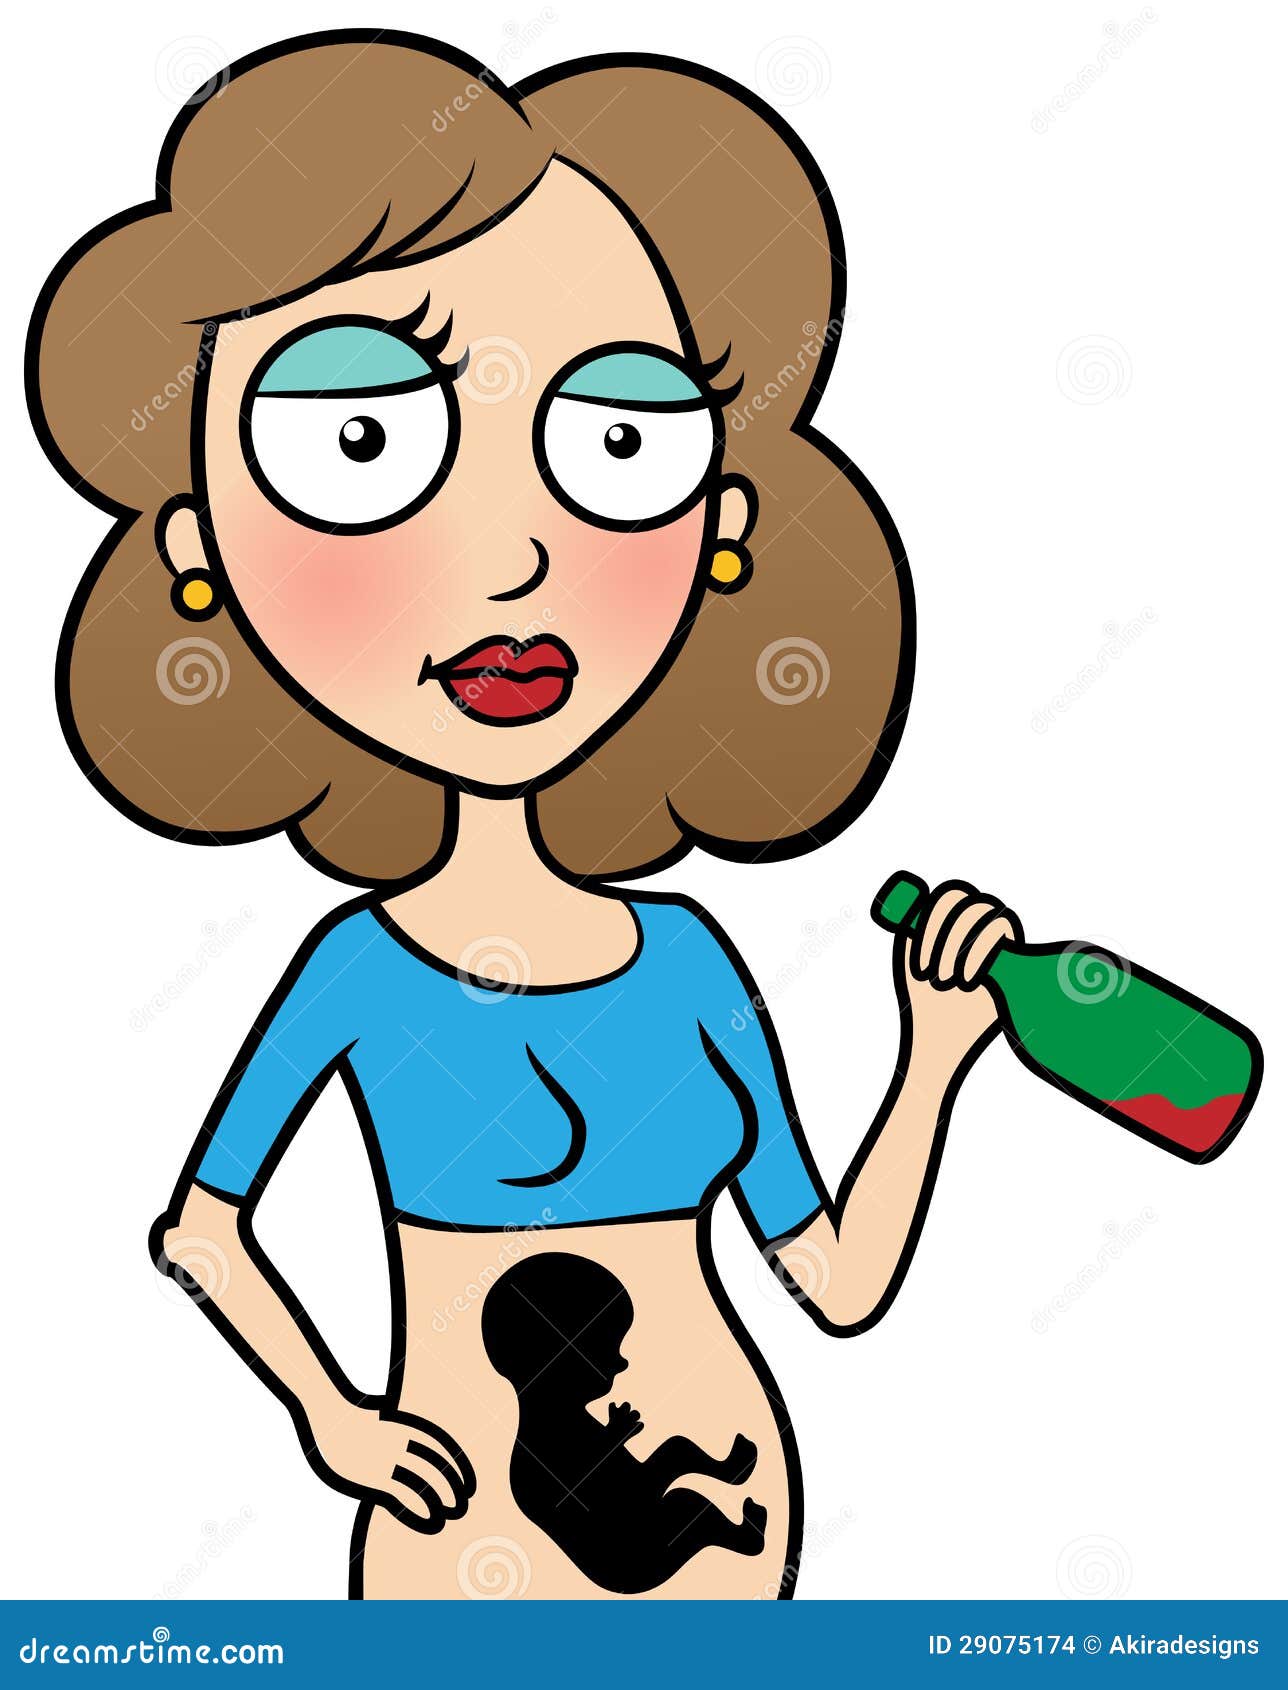 Cartoon vector illustration of young pregnant woman drinking alcohol